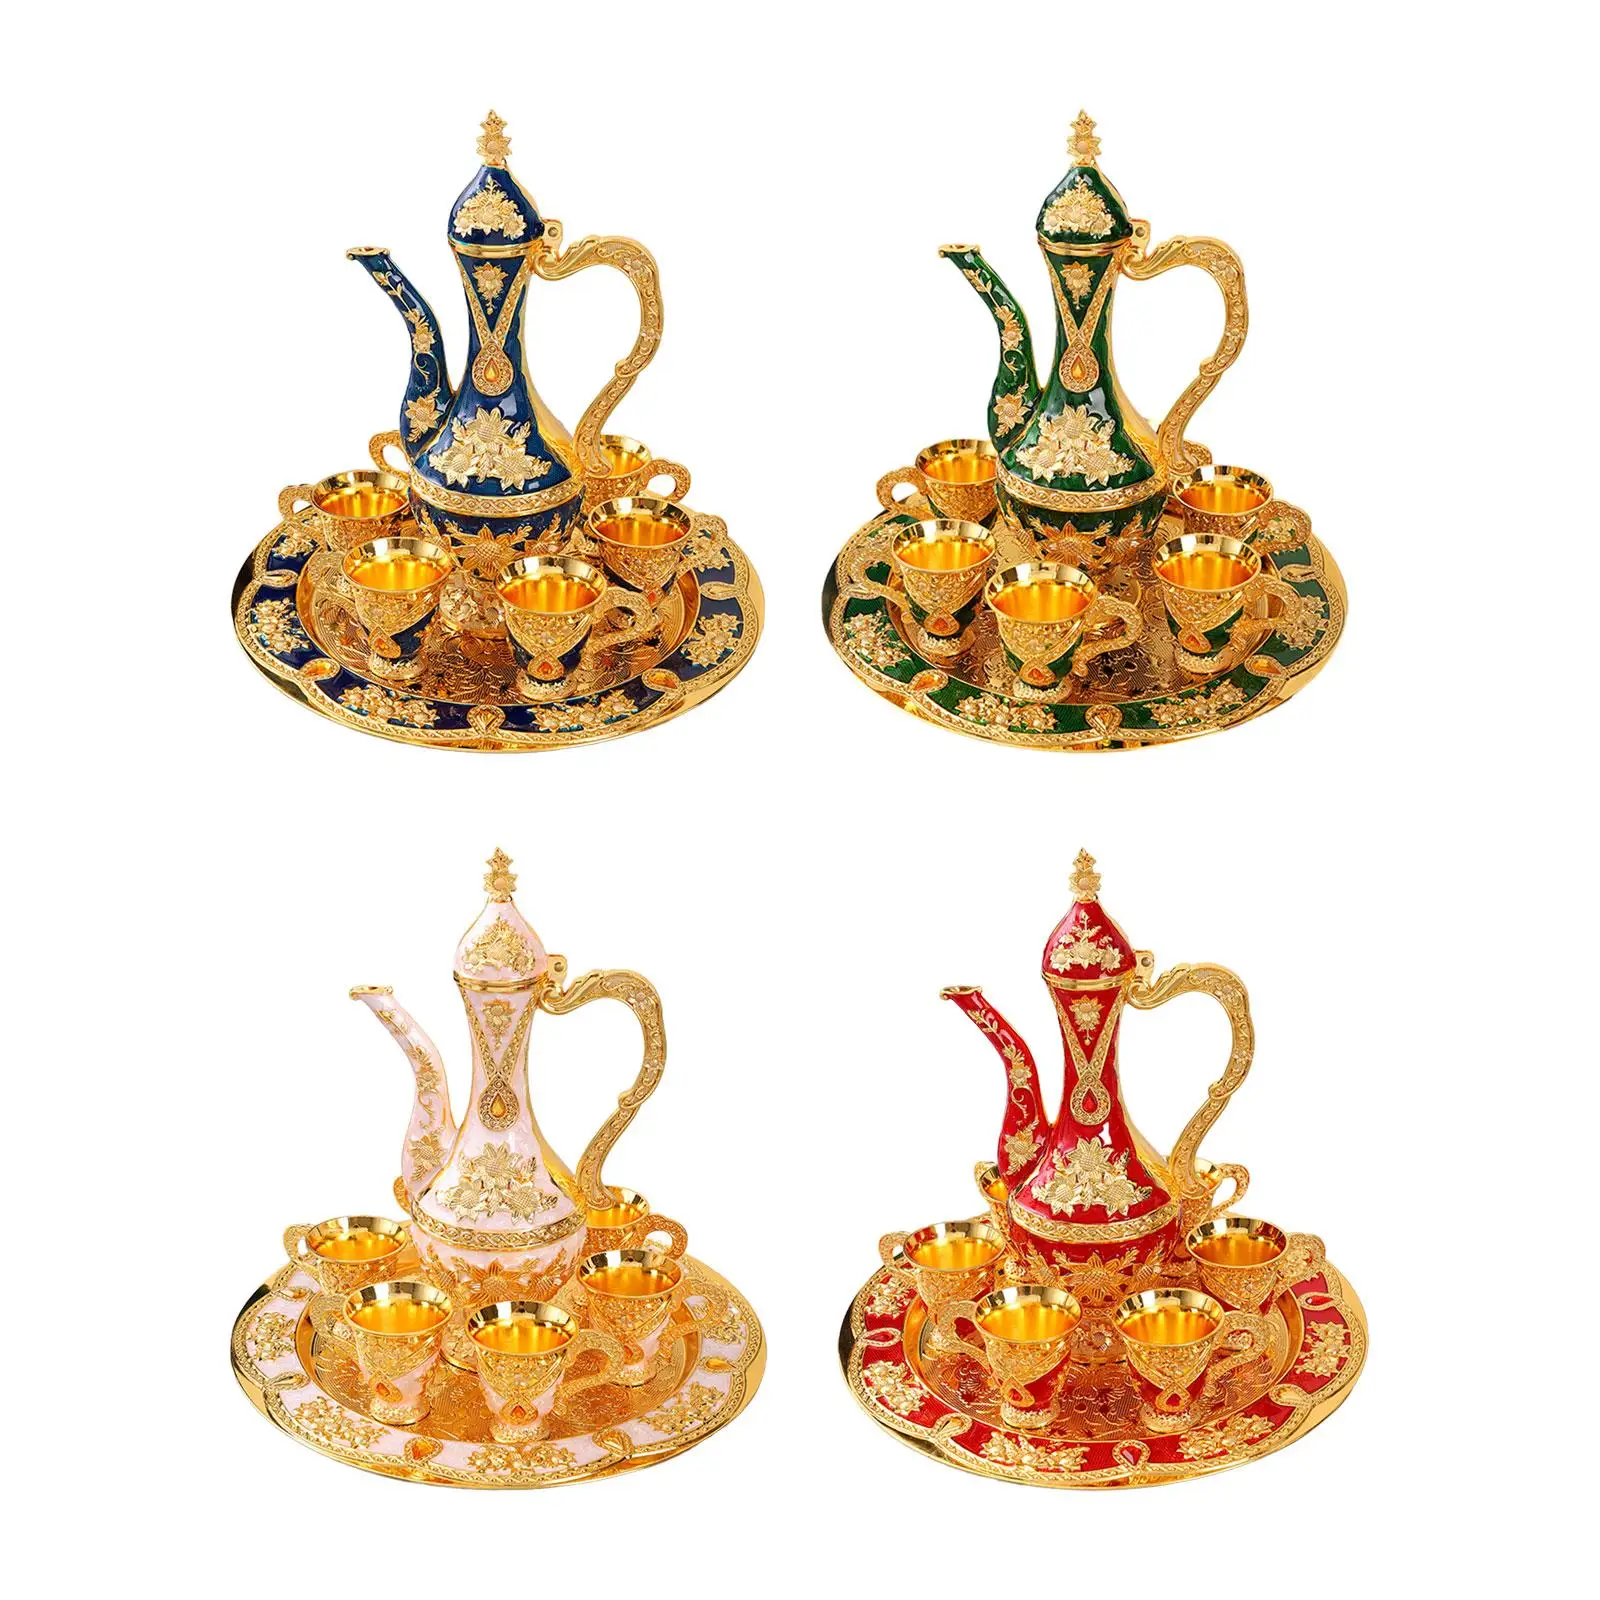 Vintage Turkish Coffee Set with Pot Teapot Turkish Coffee Cups Set Serving Set for Dining Table Living Room Home Bedroom Decor